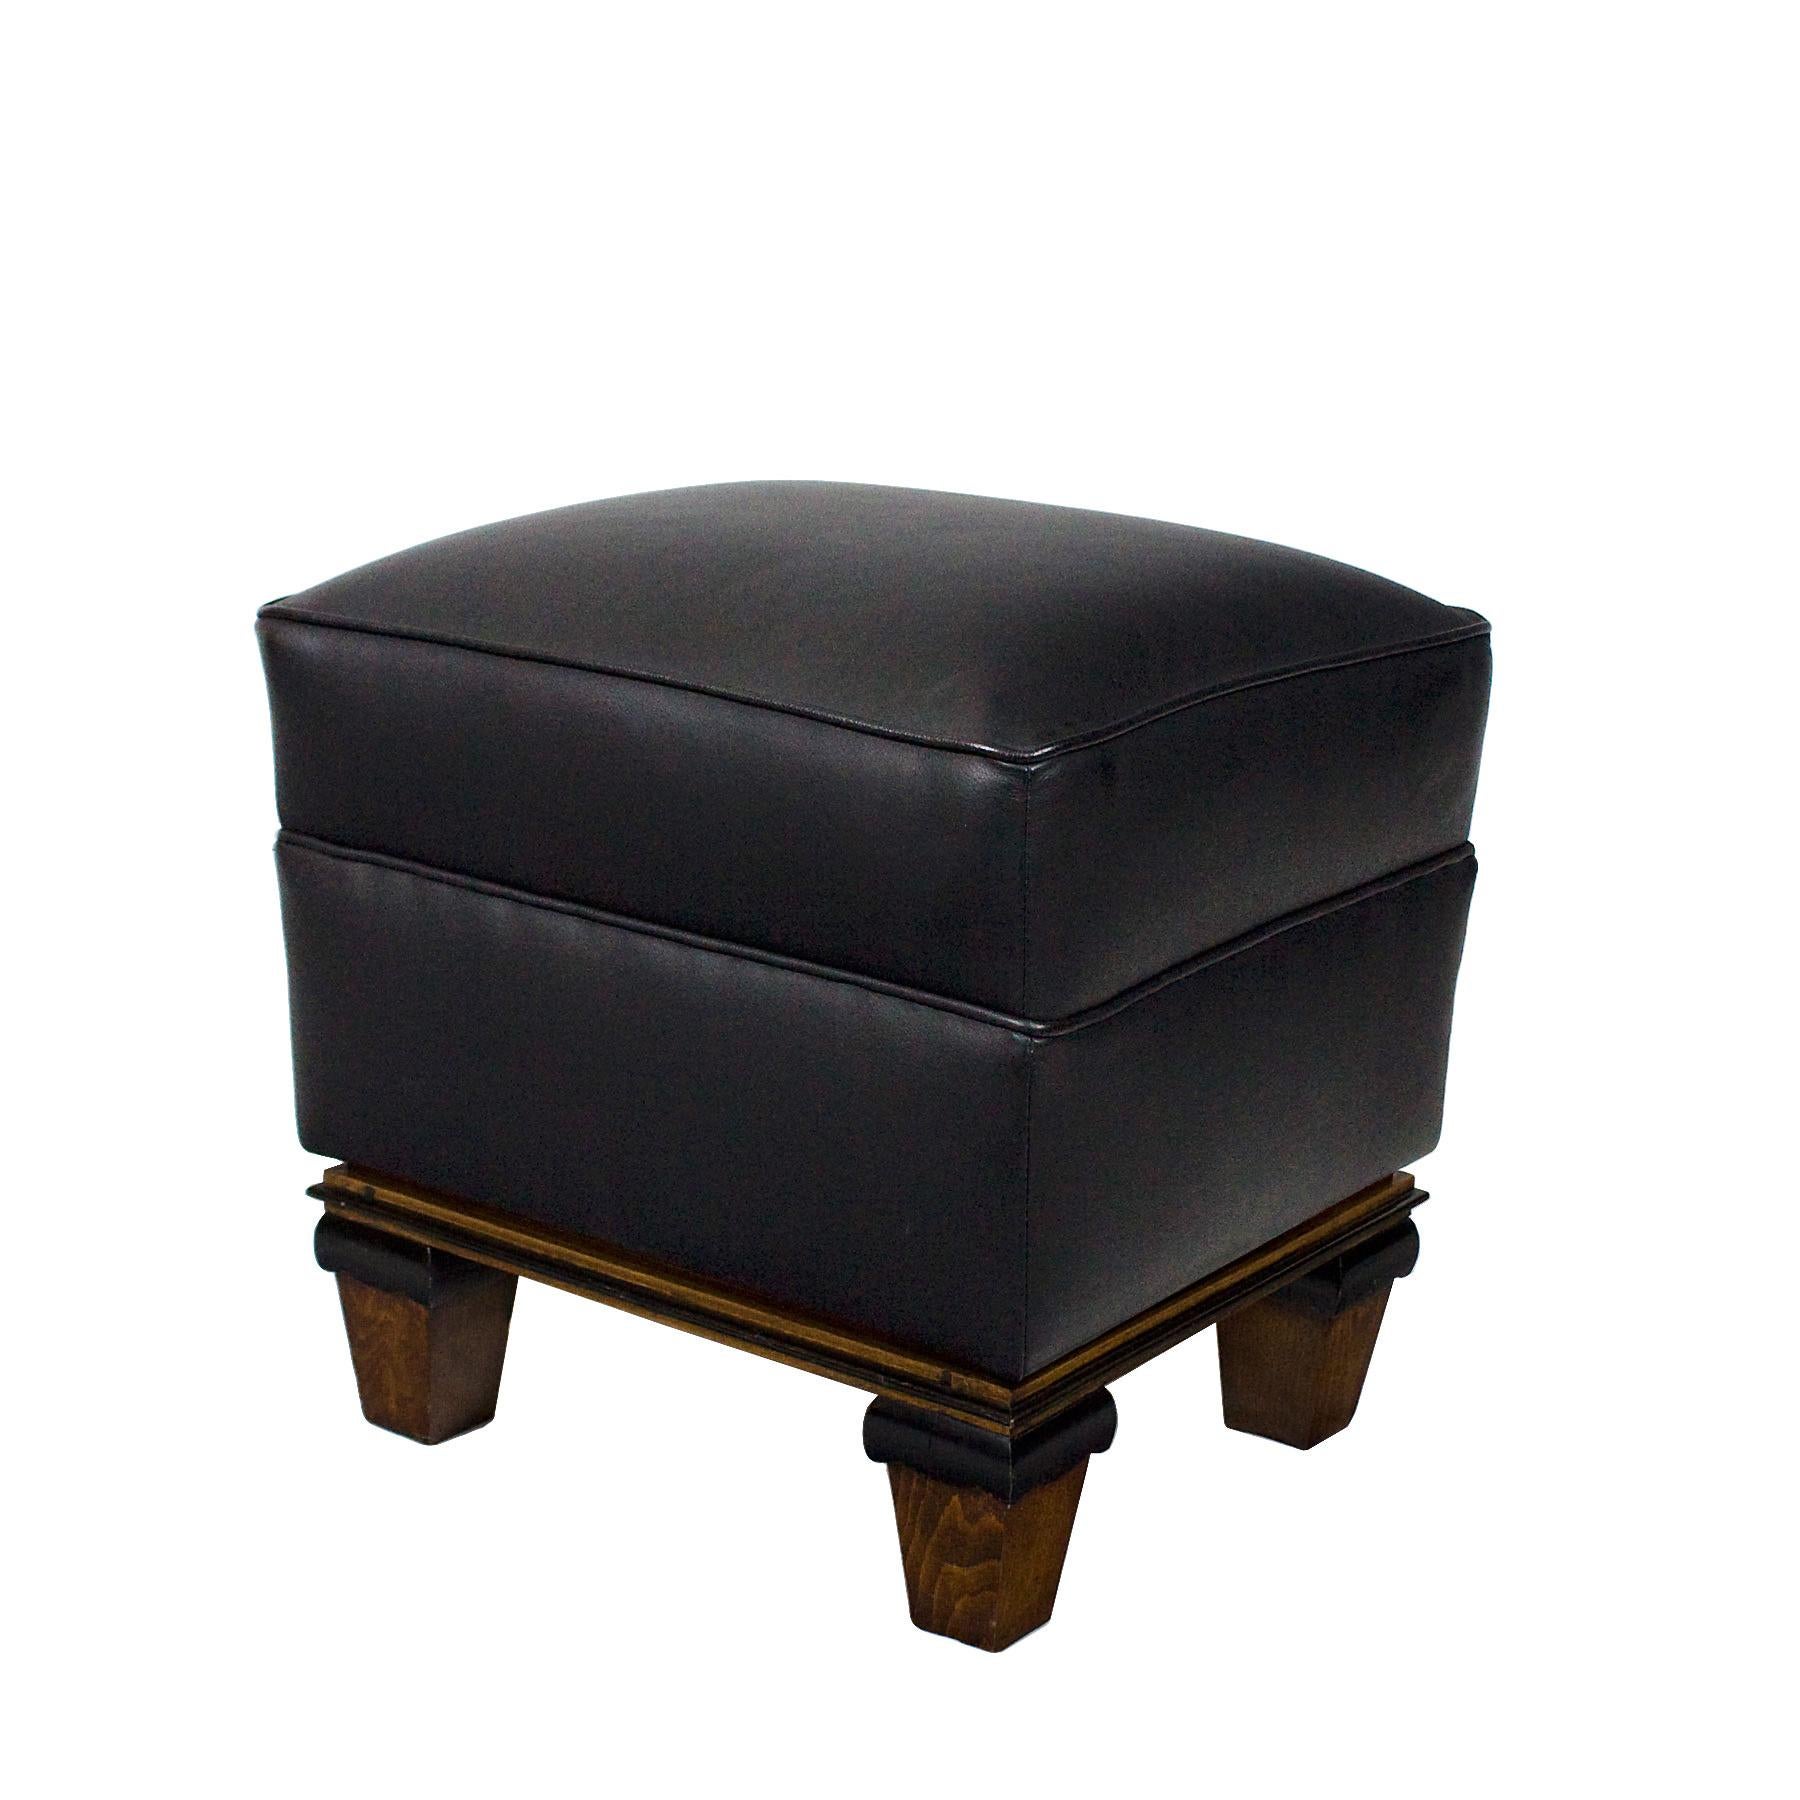 Four feet stool, beach wood and stained beechwood, black leather new upholstery.

France circa 1940.